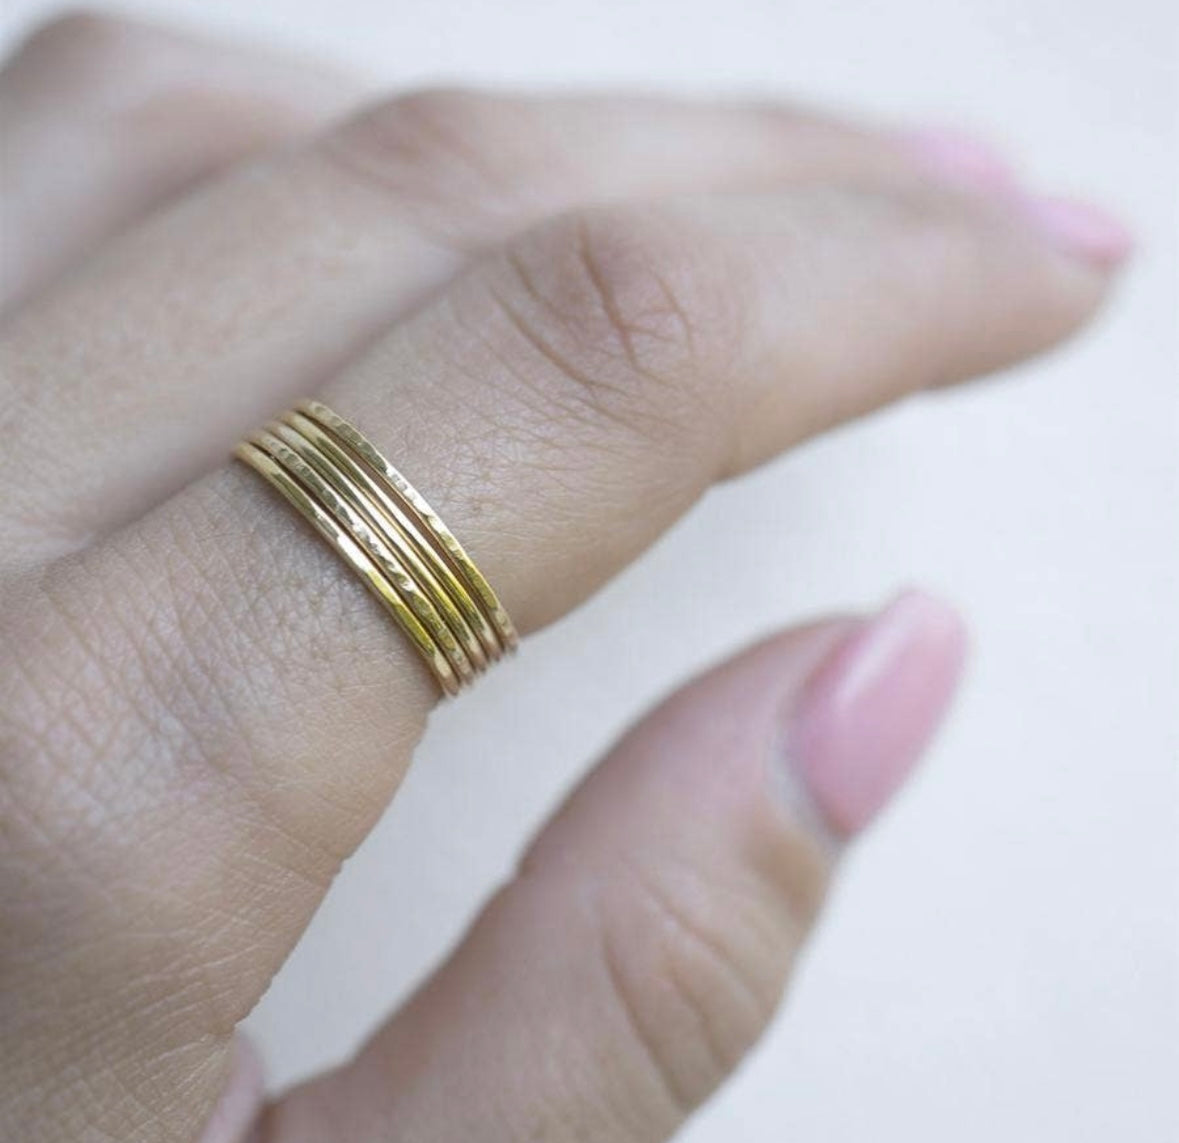 Hammered gold fill stacker ring